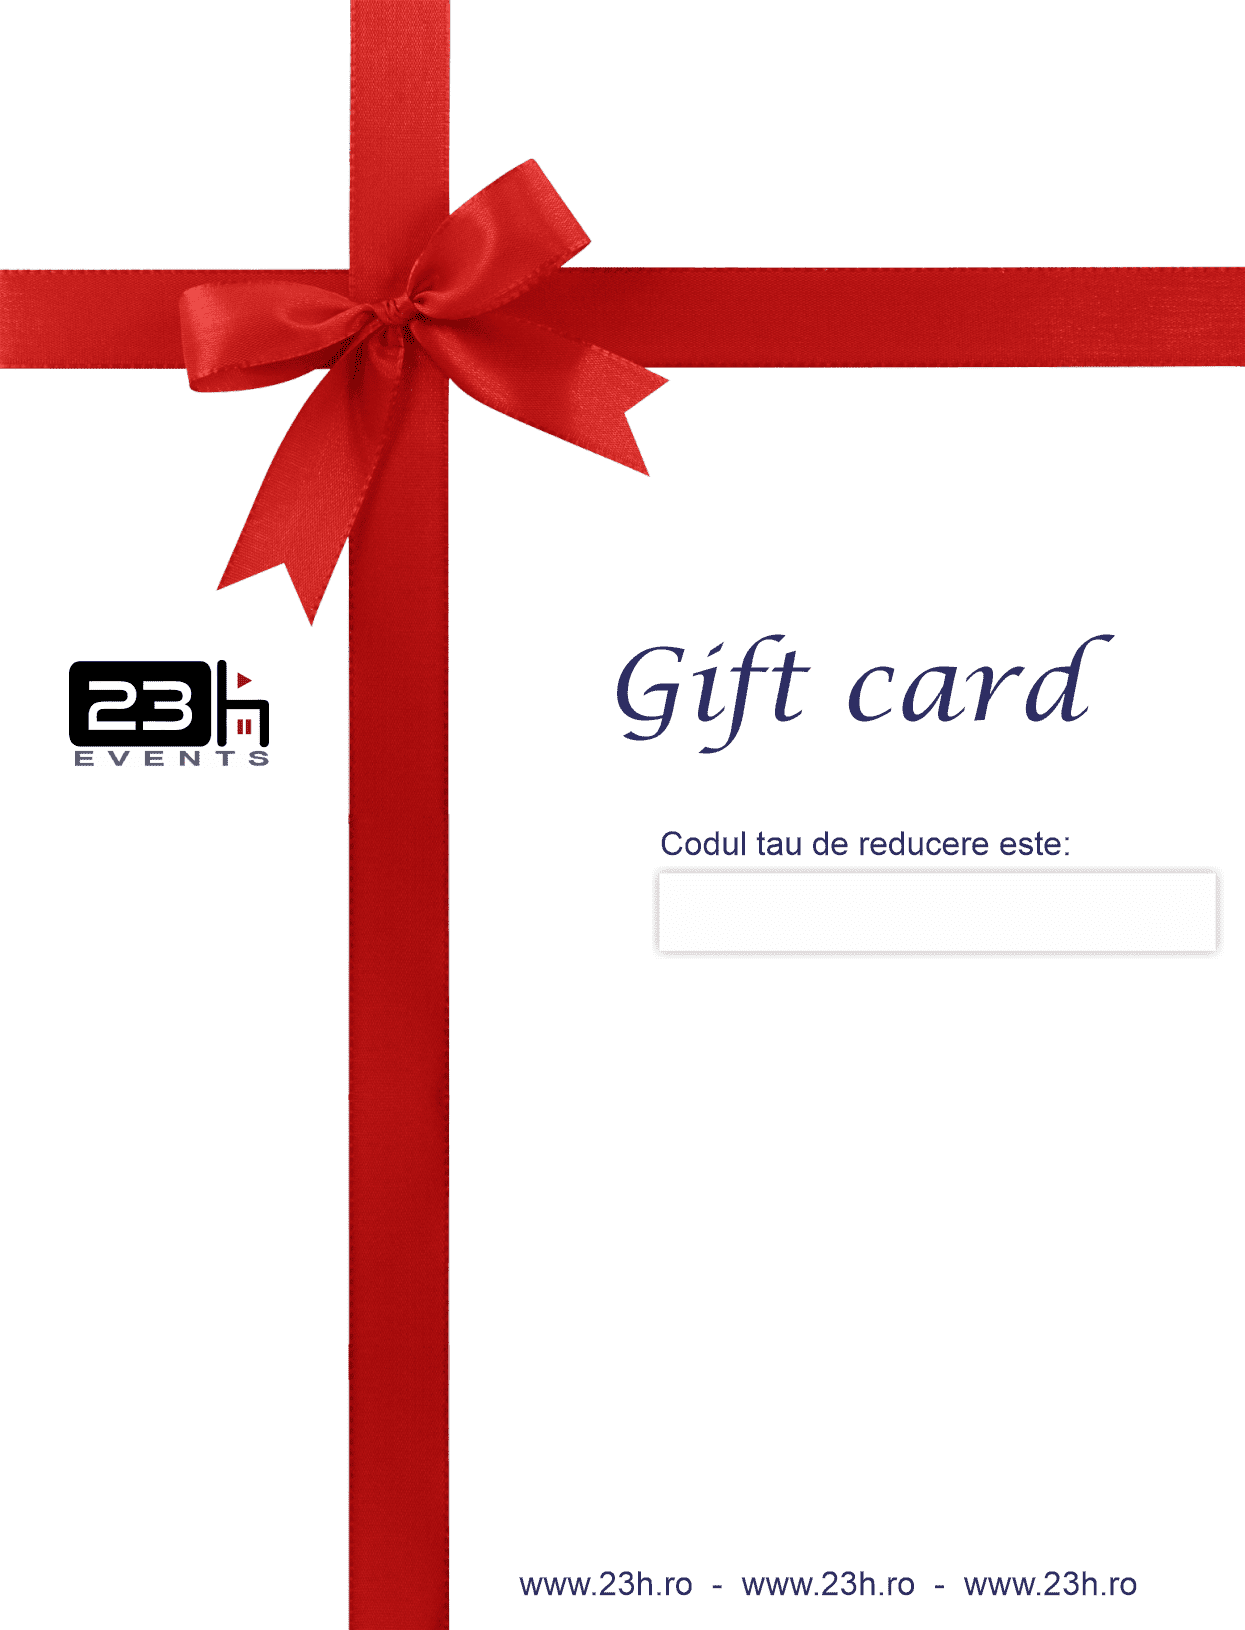 gift cards 23h Events